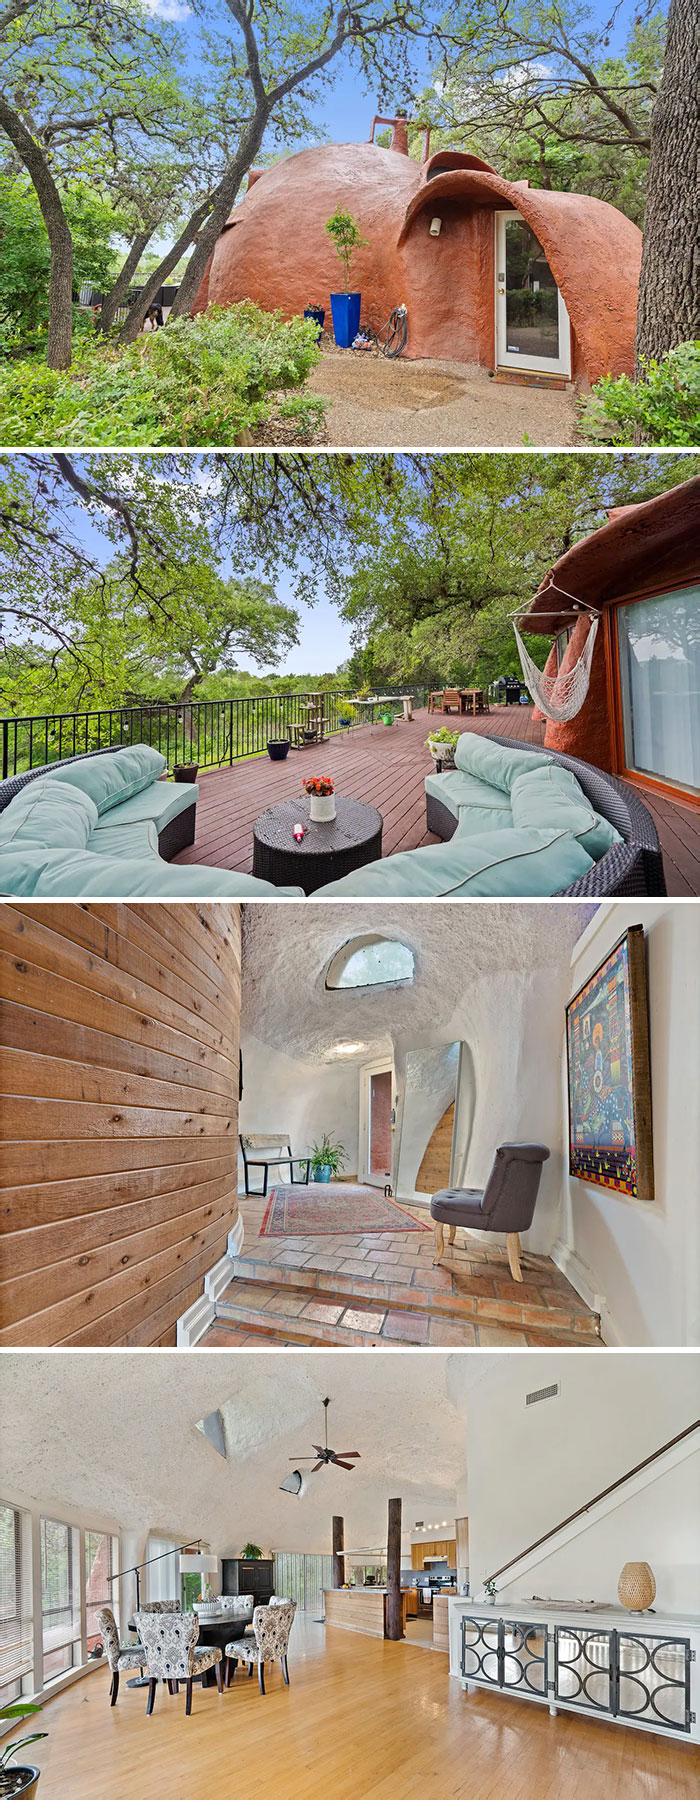 Magical Austin Hobbit House - Seclude With Hot Tub. Austin, Texas, United States